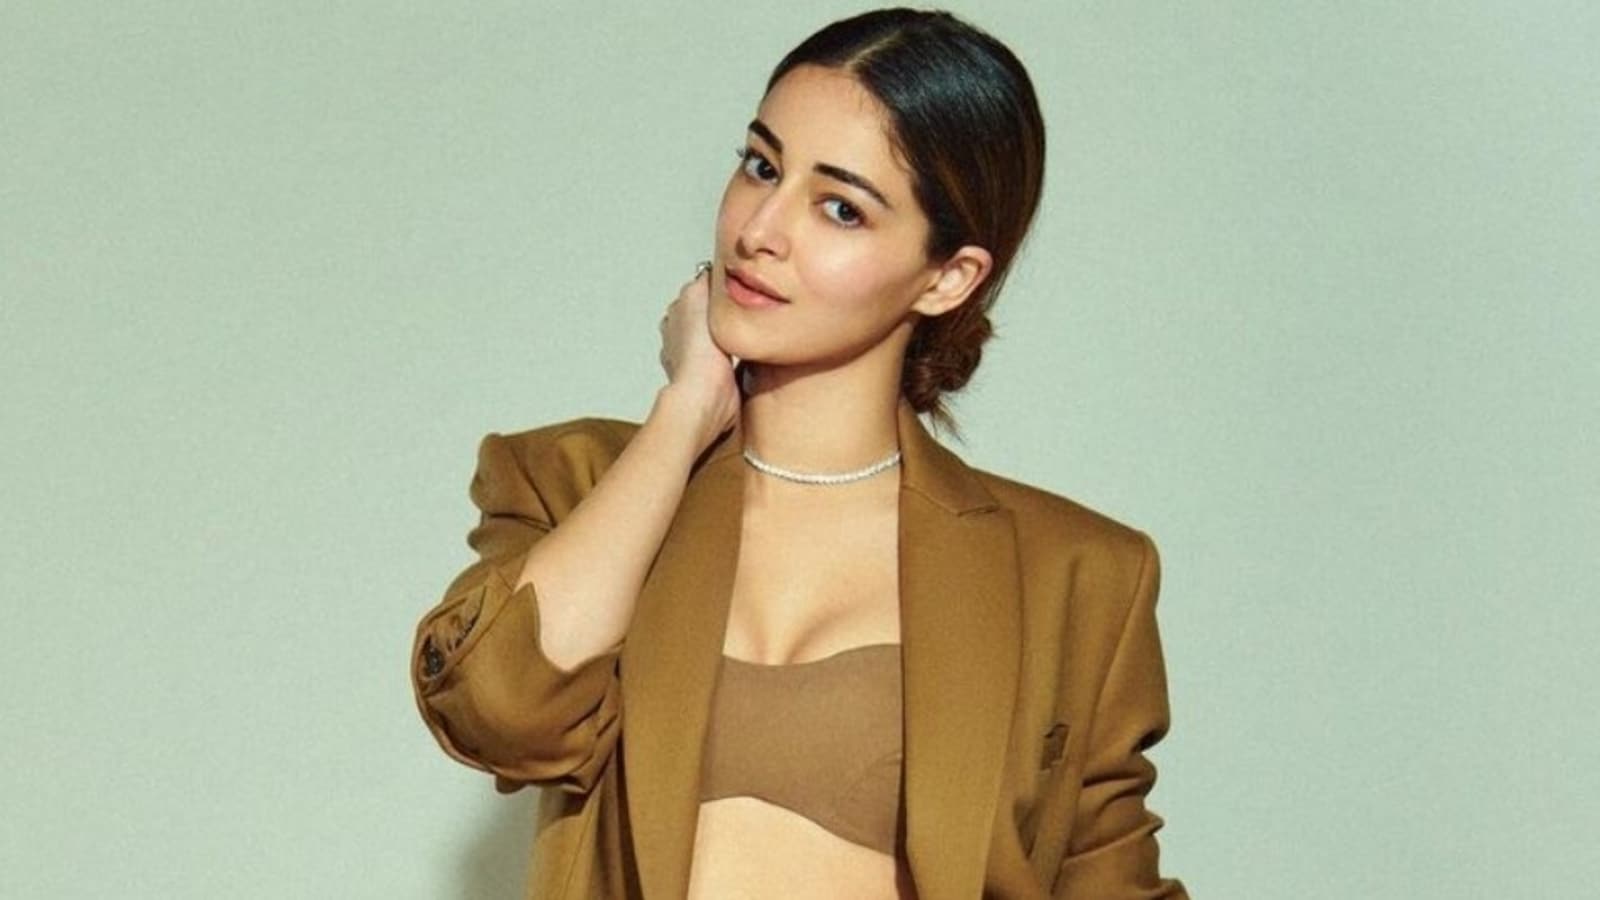 Ananya Panday’s sultry look in ₹1 lakh brown bralette and suit is as good as ‘alpenlibe’: All pics inside